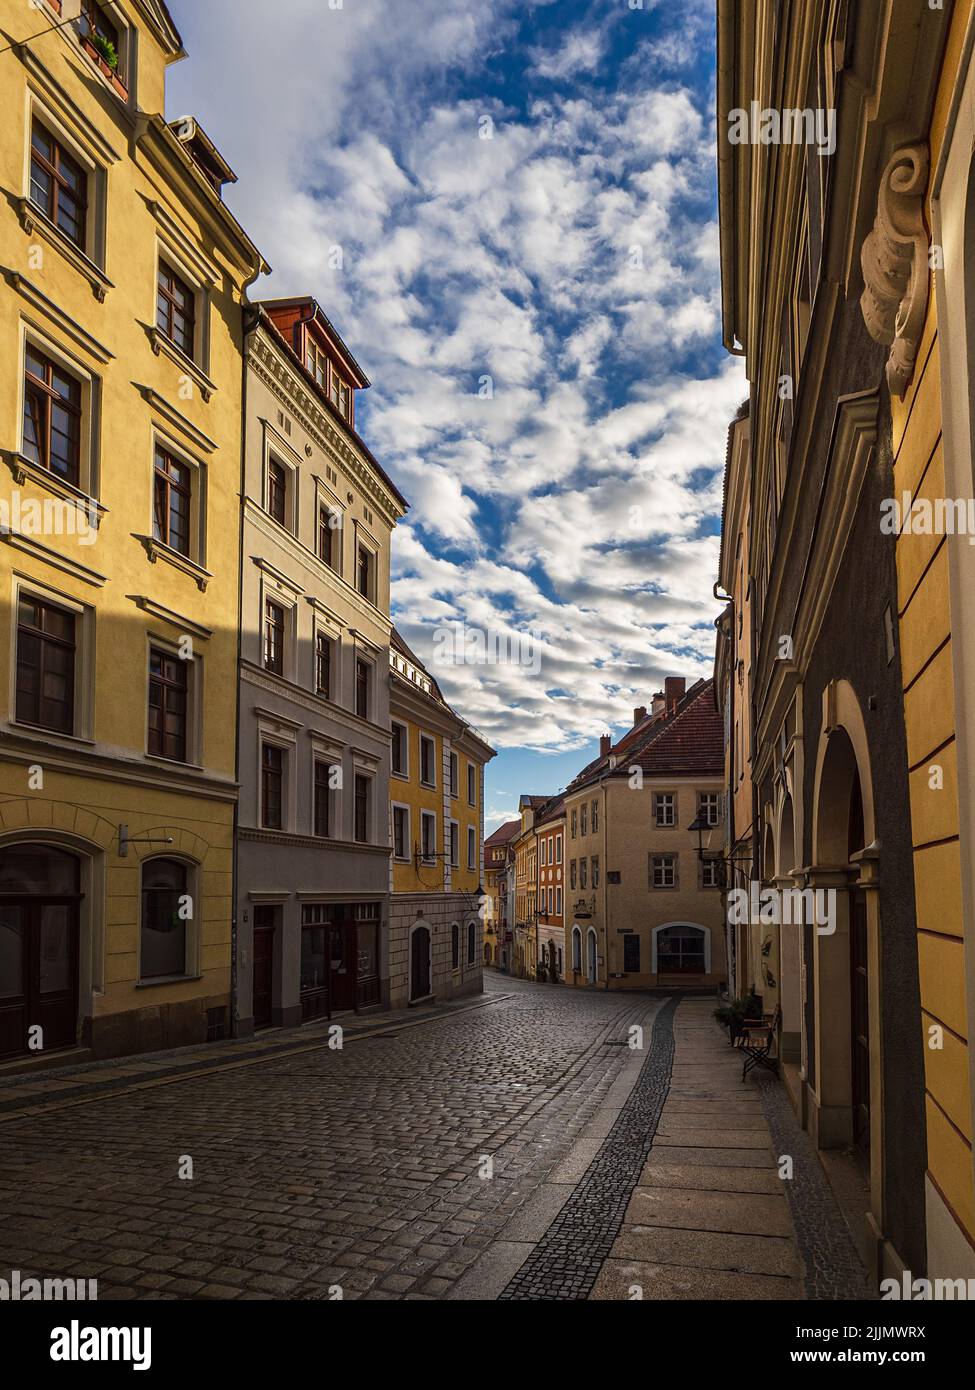 View to a historical street in Goerlitz, Germany. Stock Photo